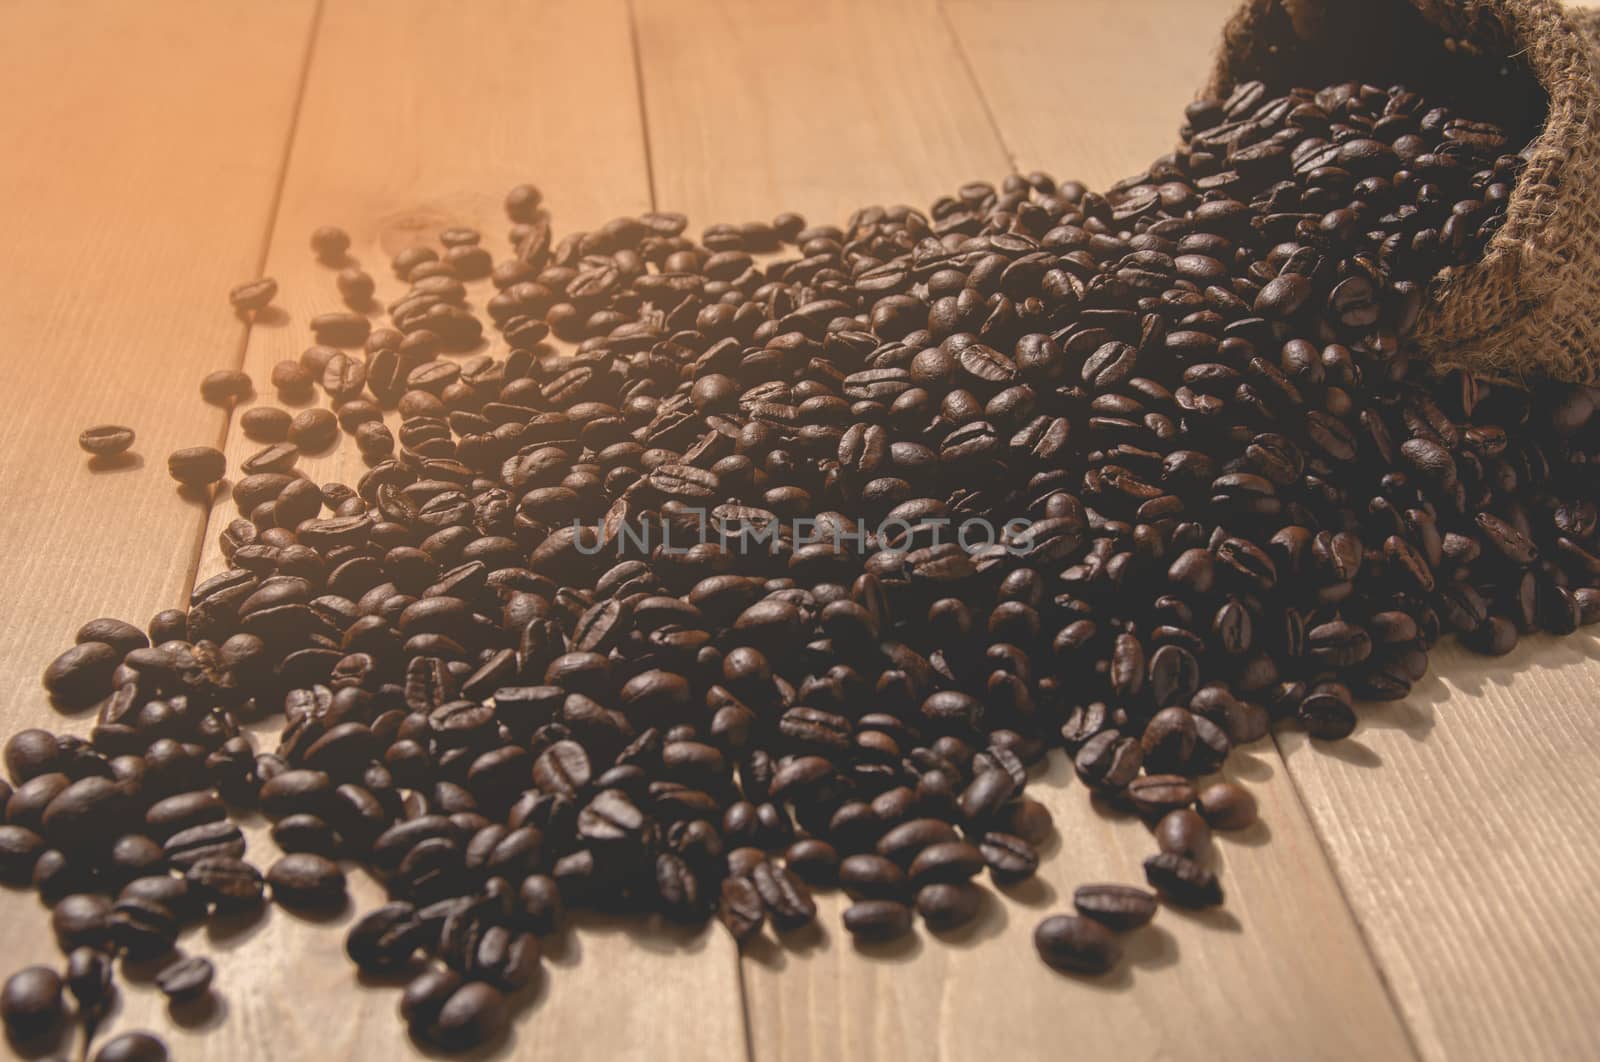 Coffee beans with sack bag on wooden table background. by kirisa99